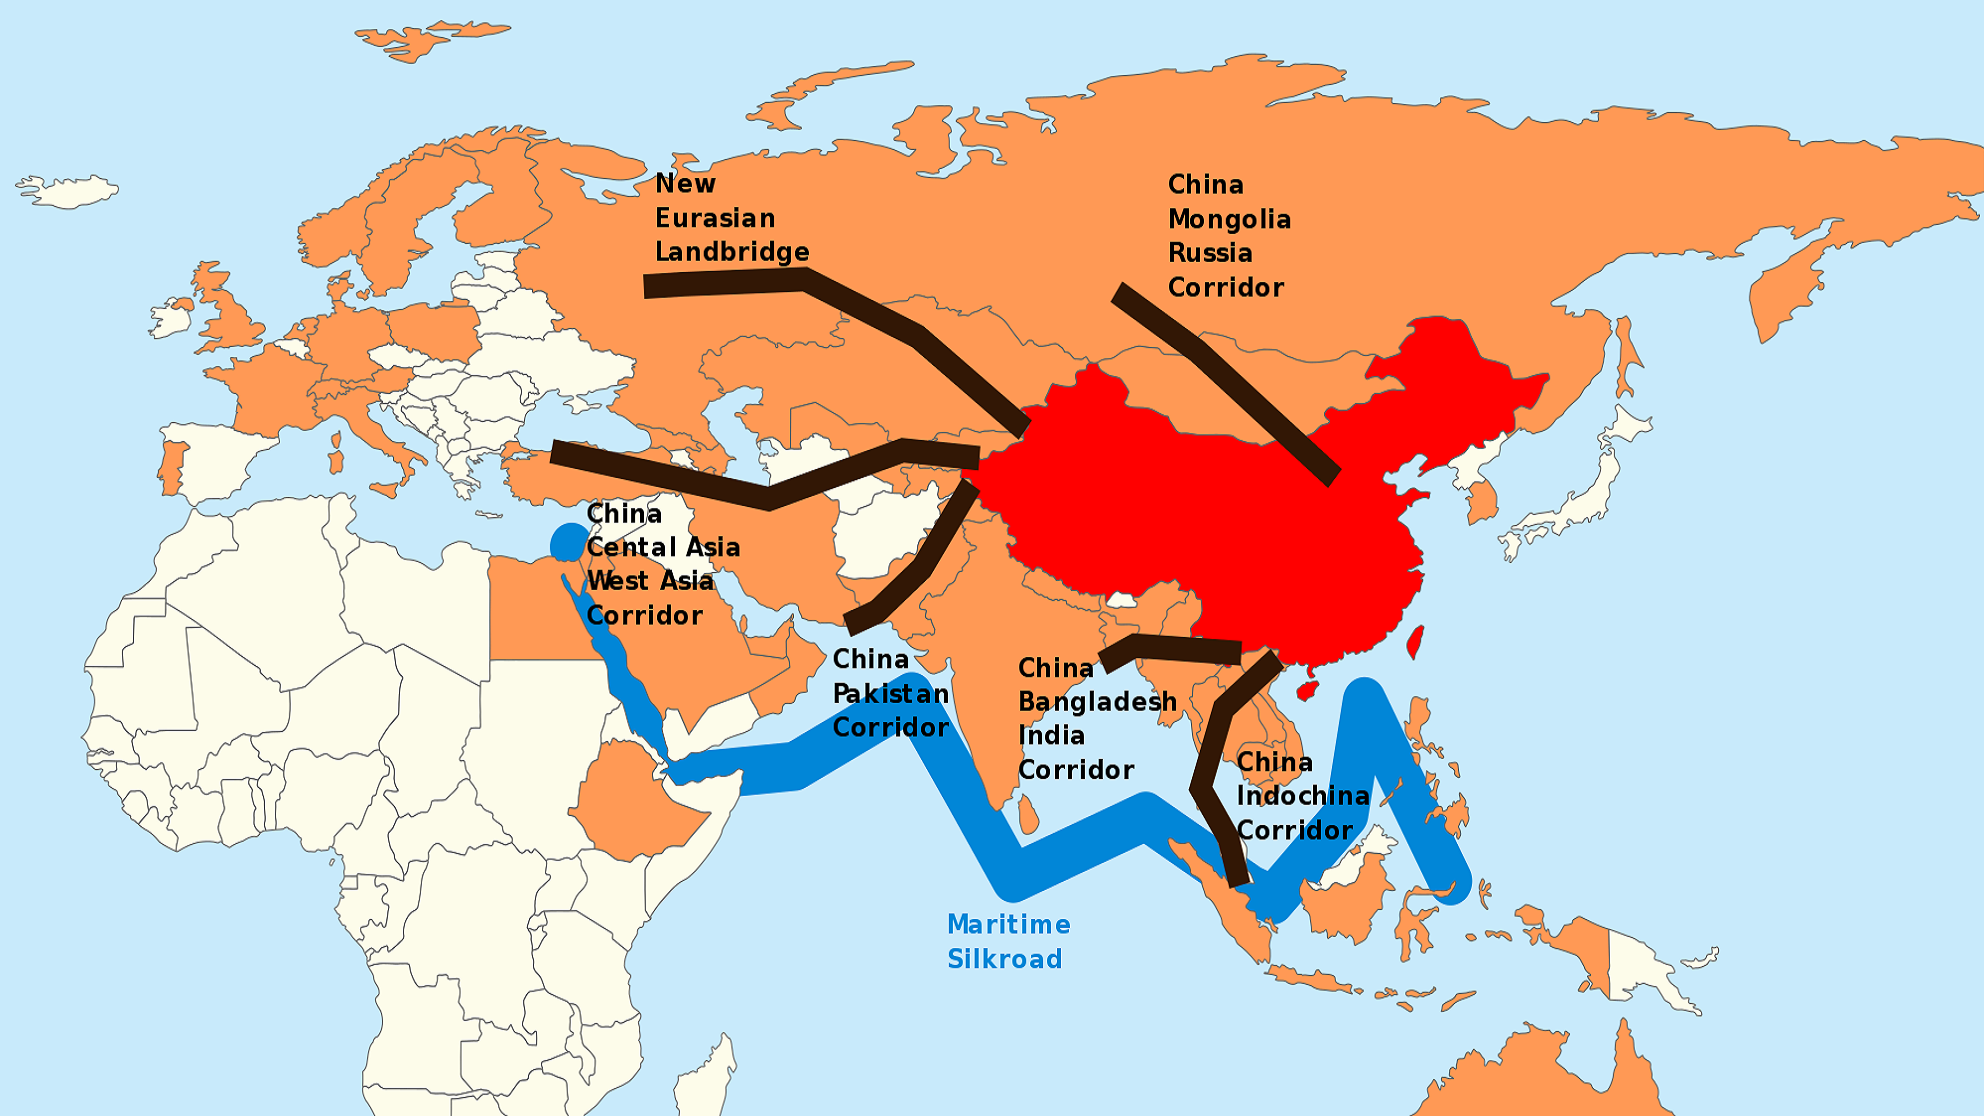 An image of the one belt road map across Asia to Europe.